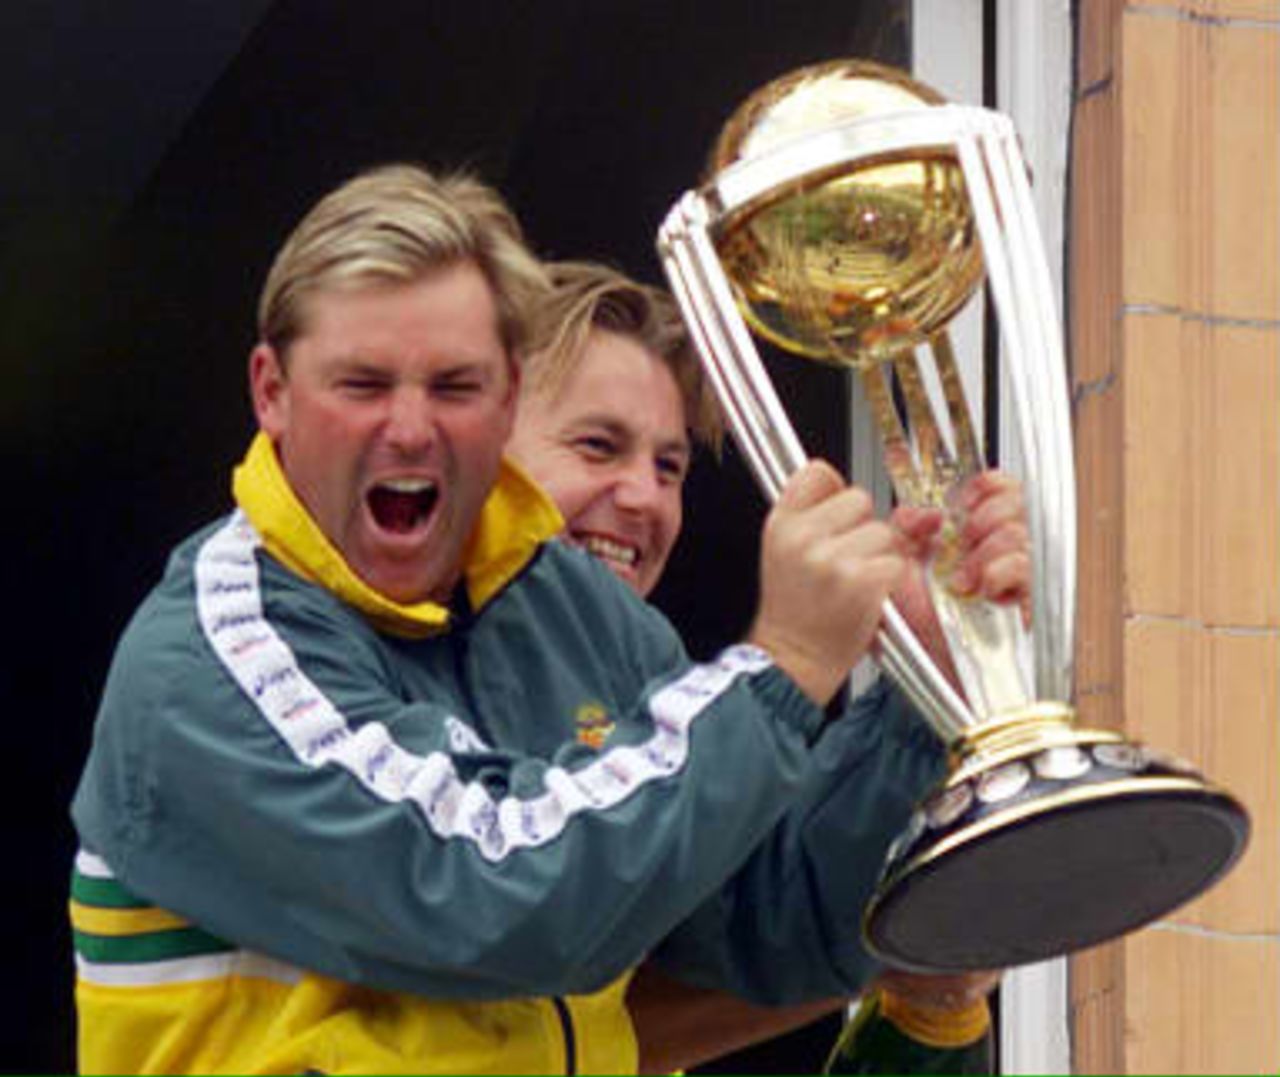 Australia's Shane Warne holds up the Cricket World Cup after Australia defeated Pakistan in the final by 8 wickets at Lords in London.  Warne took four wickets and was Man-of-the-Match. Sunday 20 June 1999